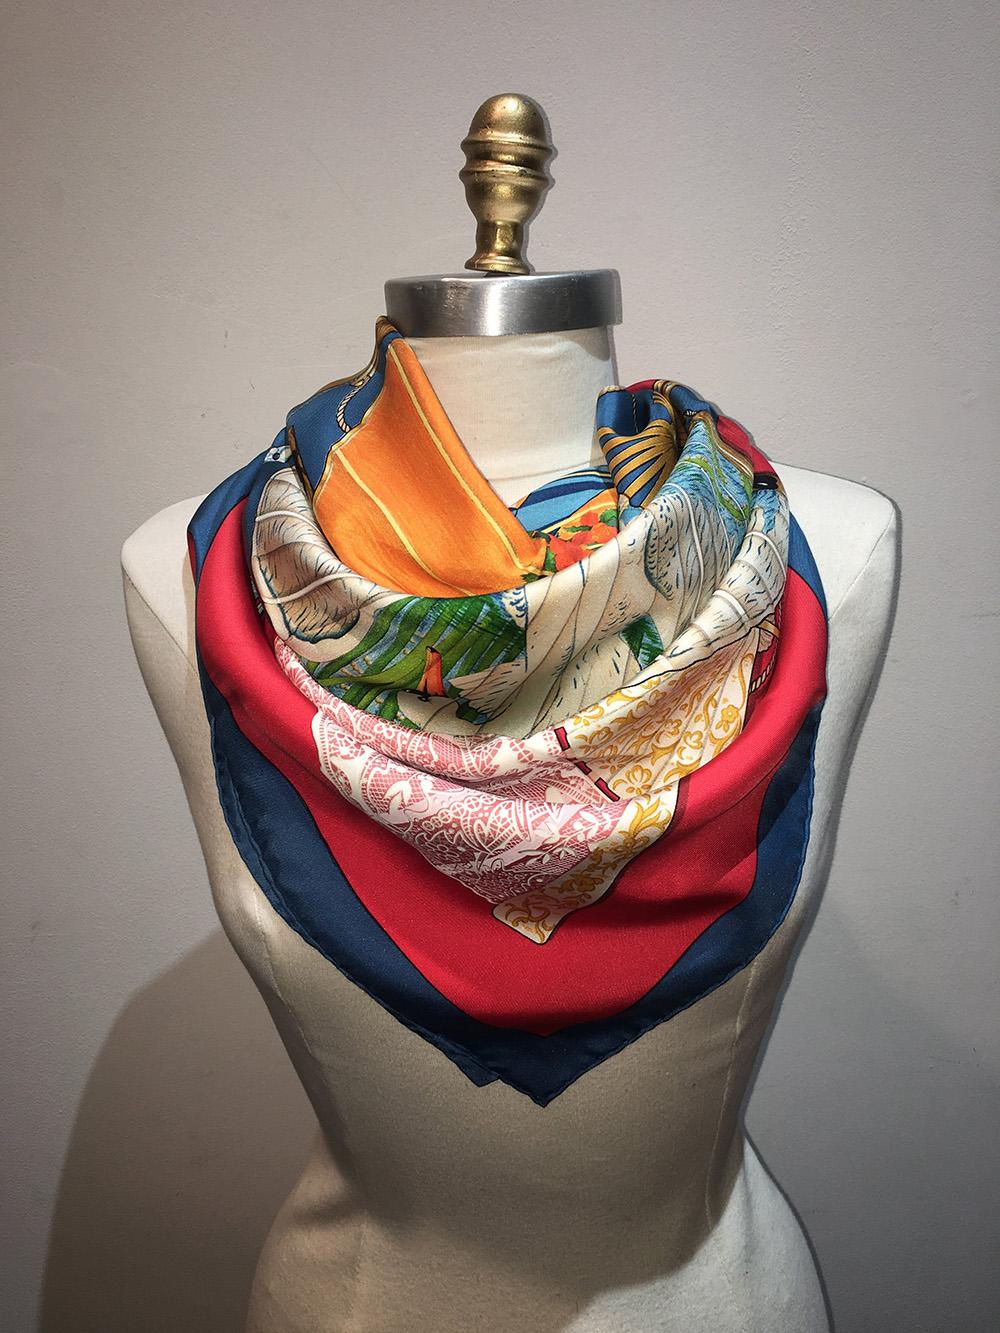 Vintage Hermes Brise de Charme Silk Scarf in Red and Navy in excellent condition. Original silk screen design c1991 by Julia Abadie features an assortment of antique fans in lace, peacock, horse, swan and floral prints over a red background